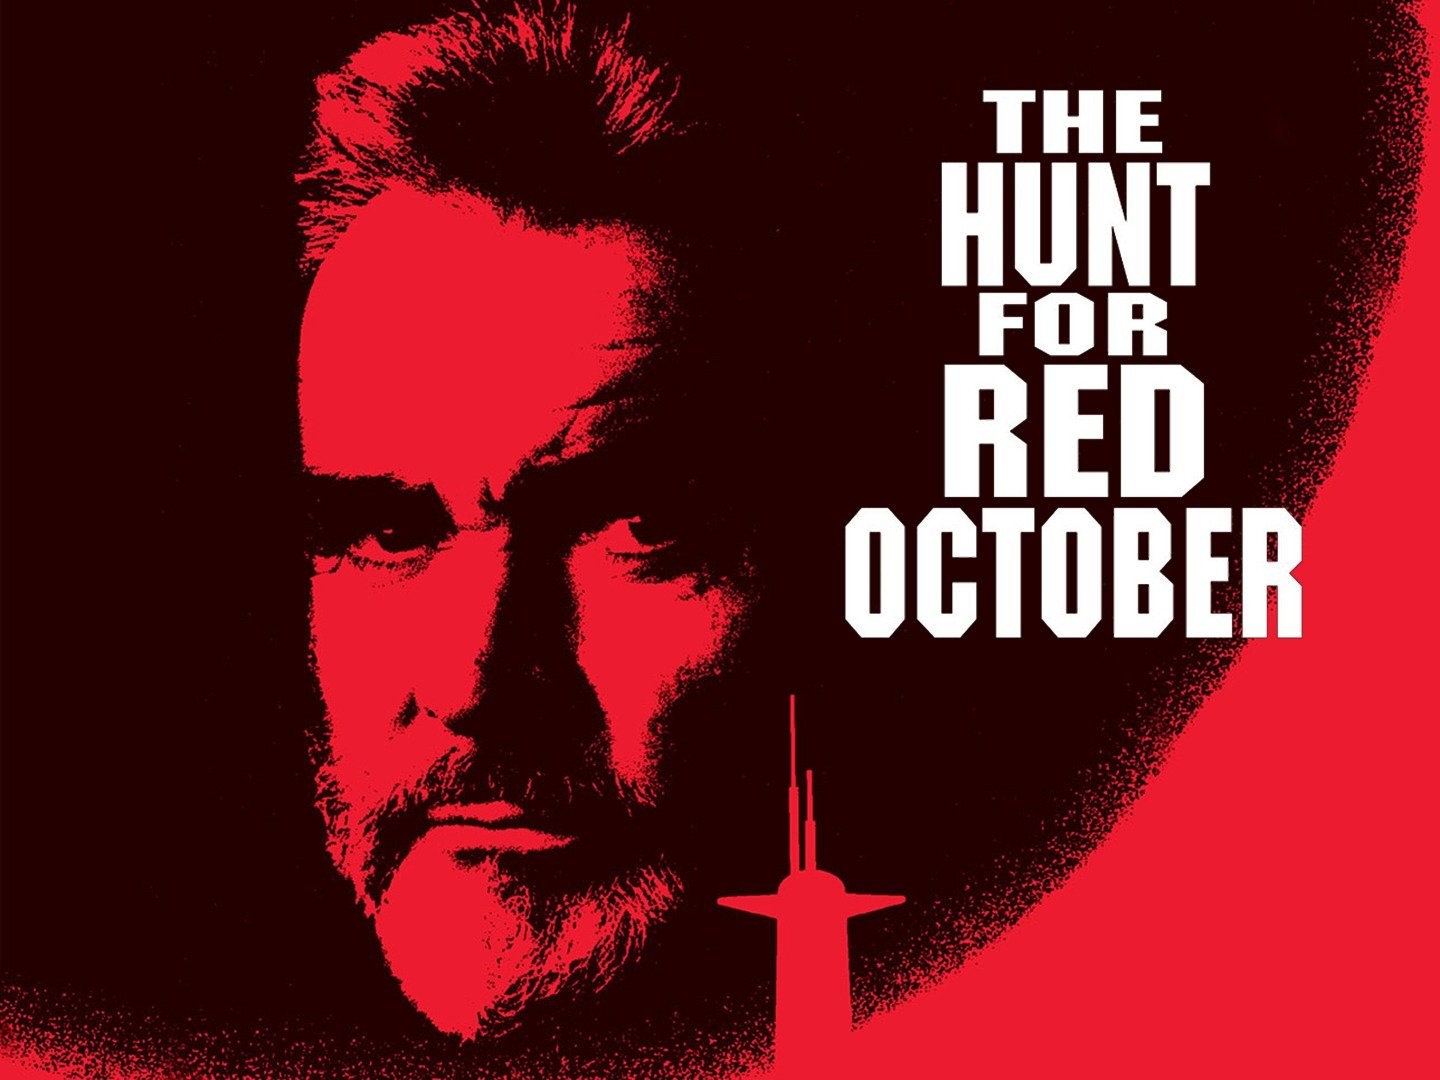 The Hunt For Red October Movie Review for Parents